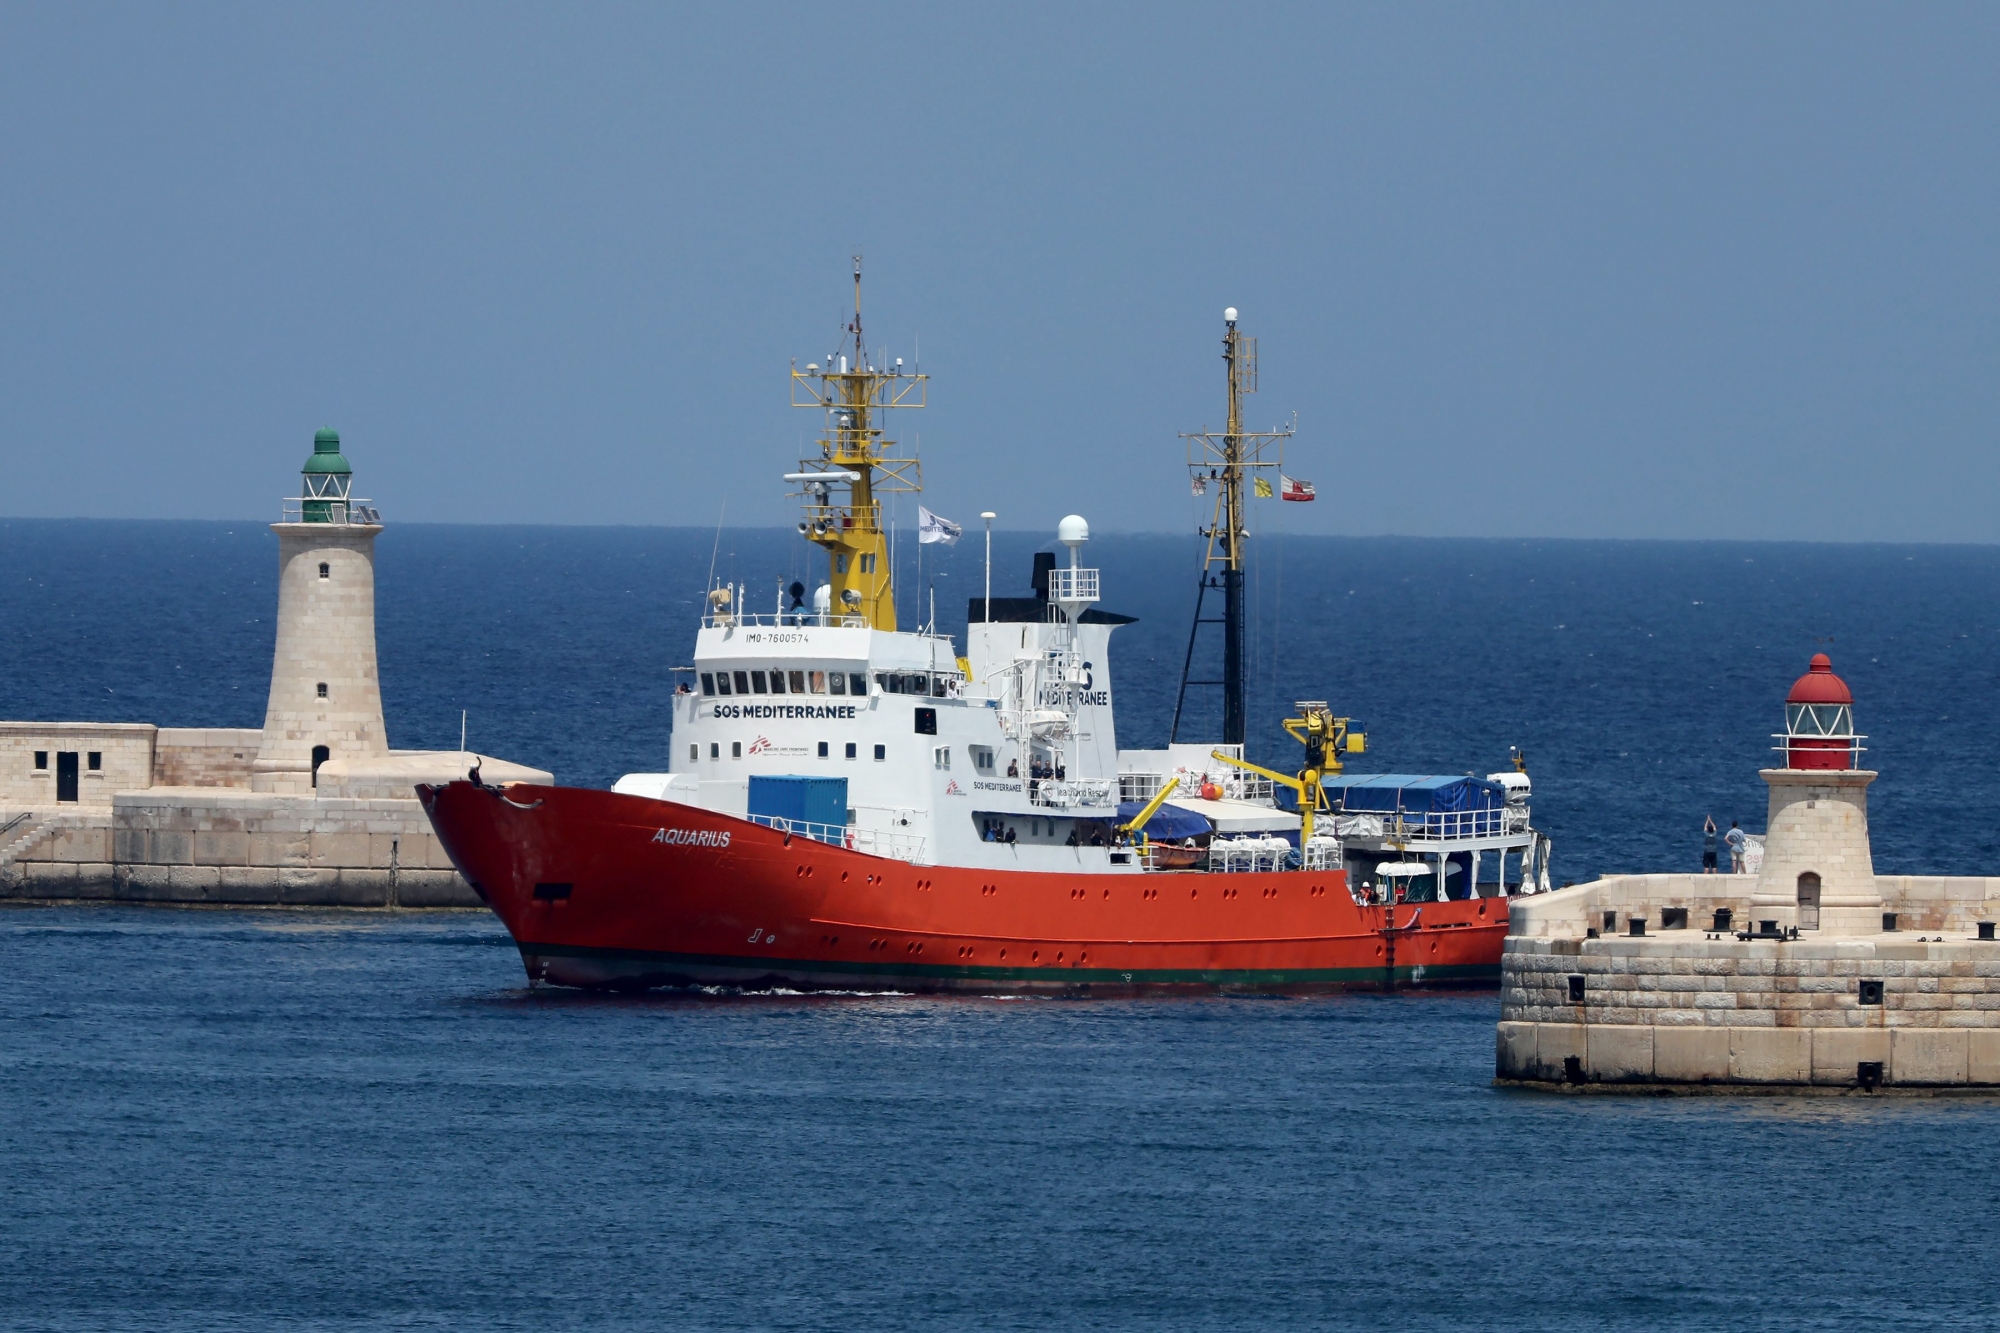 epa06951215 The SOS Mediterranee NGO rescue vessel MV Aquarius, which was stranded in the Mediterranean with some 141 migrants on board, enters the Grand Harbour in Senglea, Valletta, Malta, 15 August 2018. The migrant rescue ship was allowed to dock in Malta on the day after days at sea with some 141 migrants on board - who were rescued off the Libyan coast Libya on 10 August - and since then turned away from Italian ports, media reported. Malta reached an agreement with Germany, Spain, Portugal, France and Luxembourg to allow the ship to dock before sending the migrants to the five countries.  EPA/DOMENIC AQUILINA MALTA MIGRATION AQUARIUS VESSEL